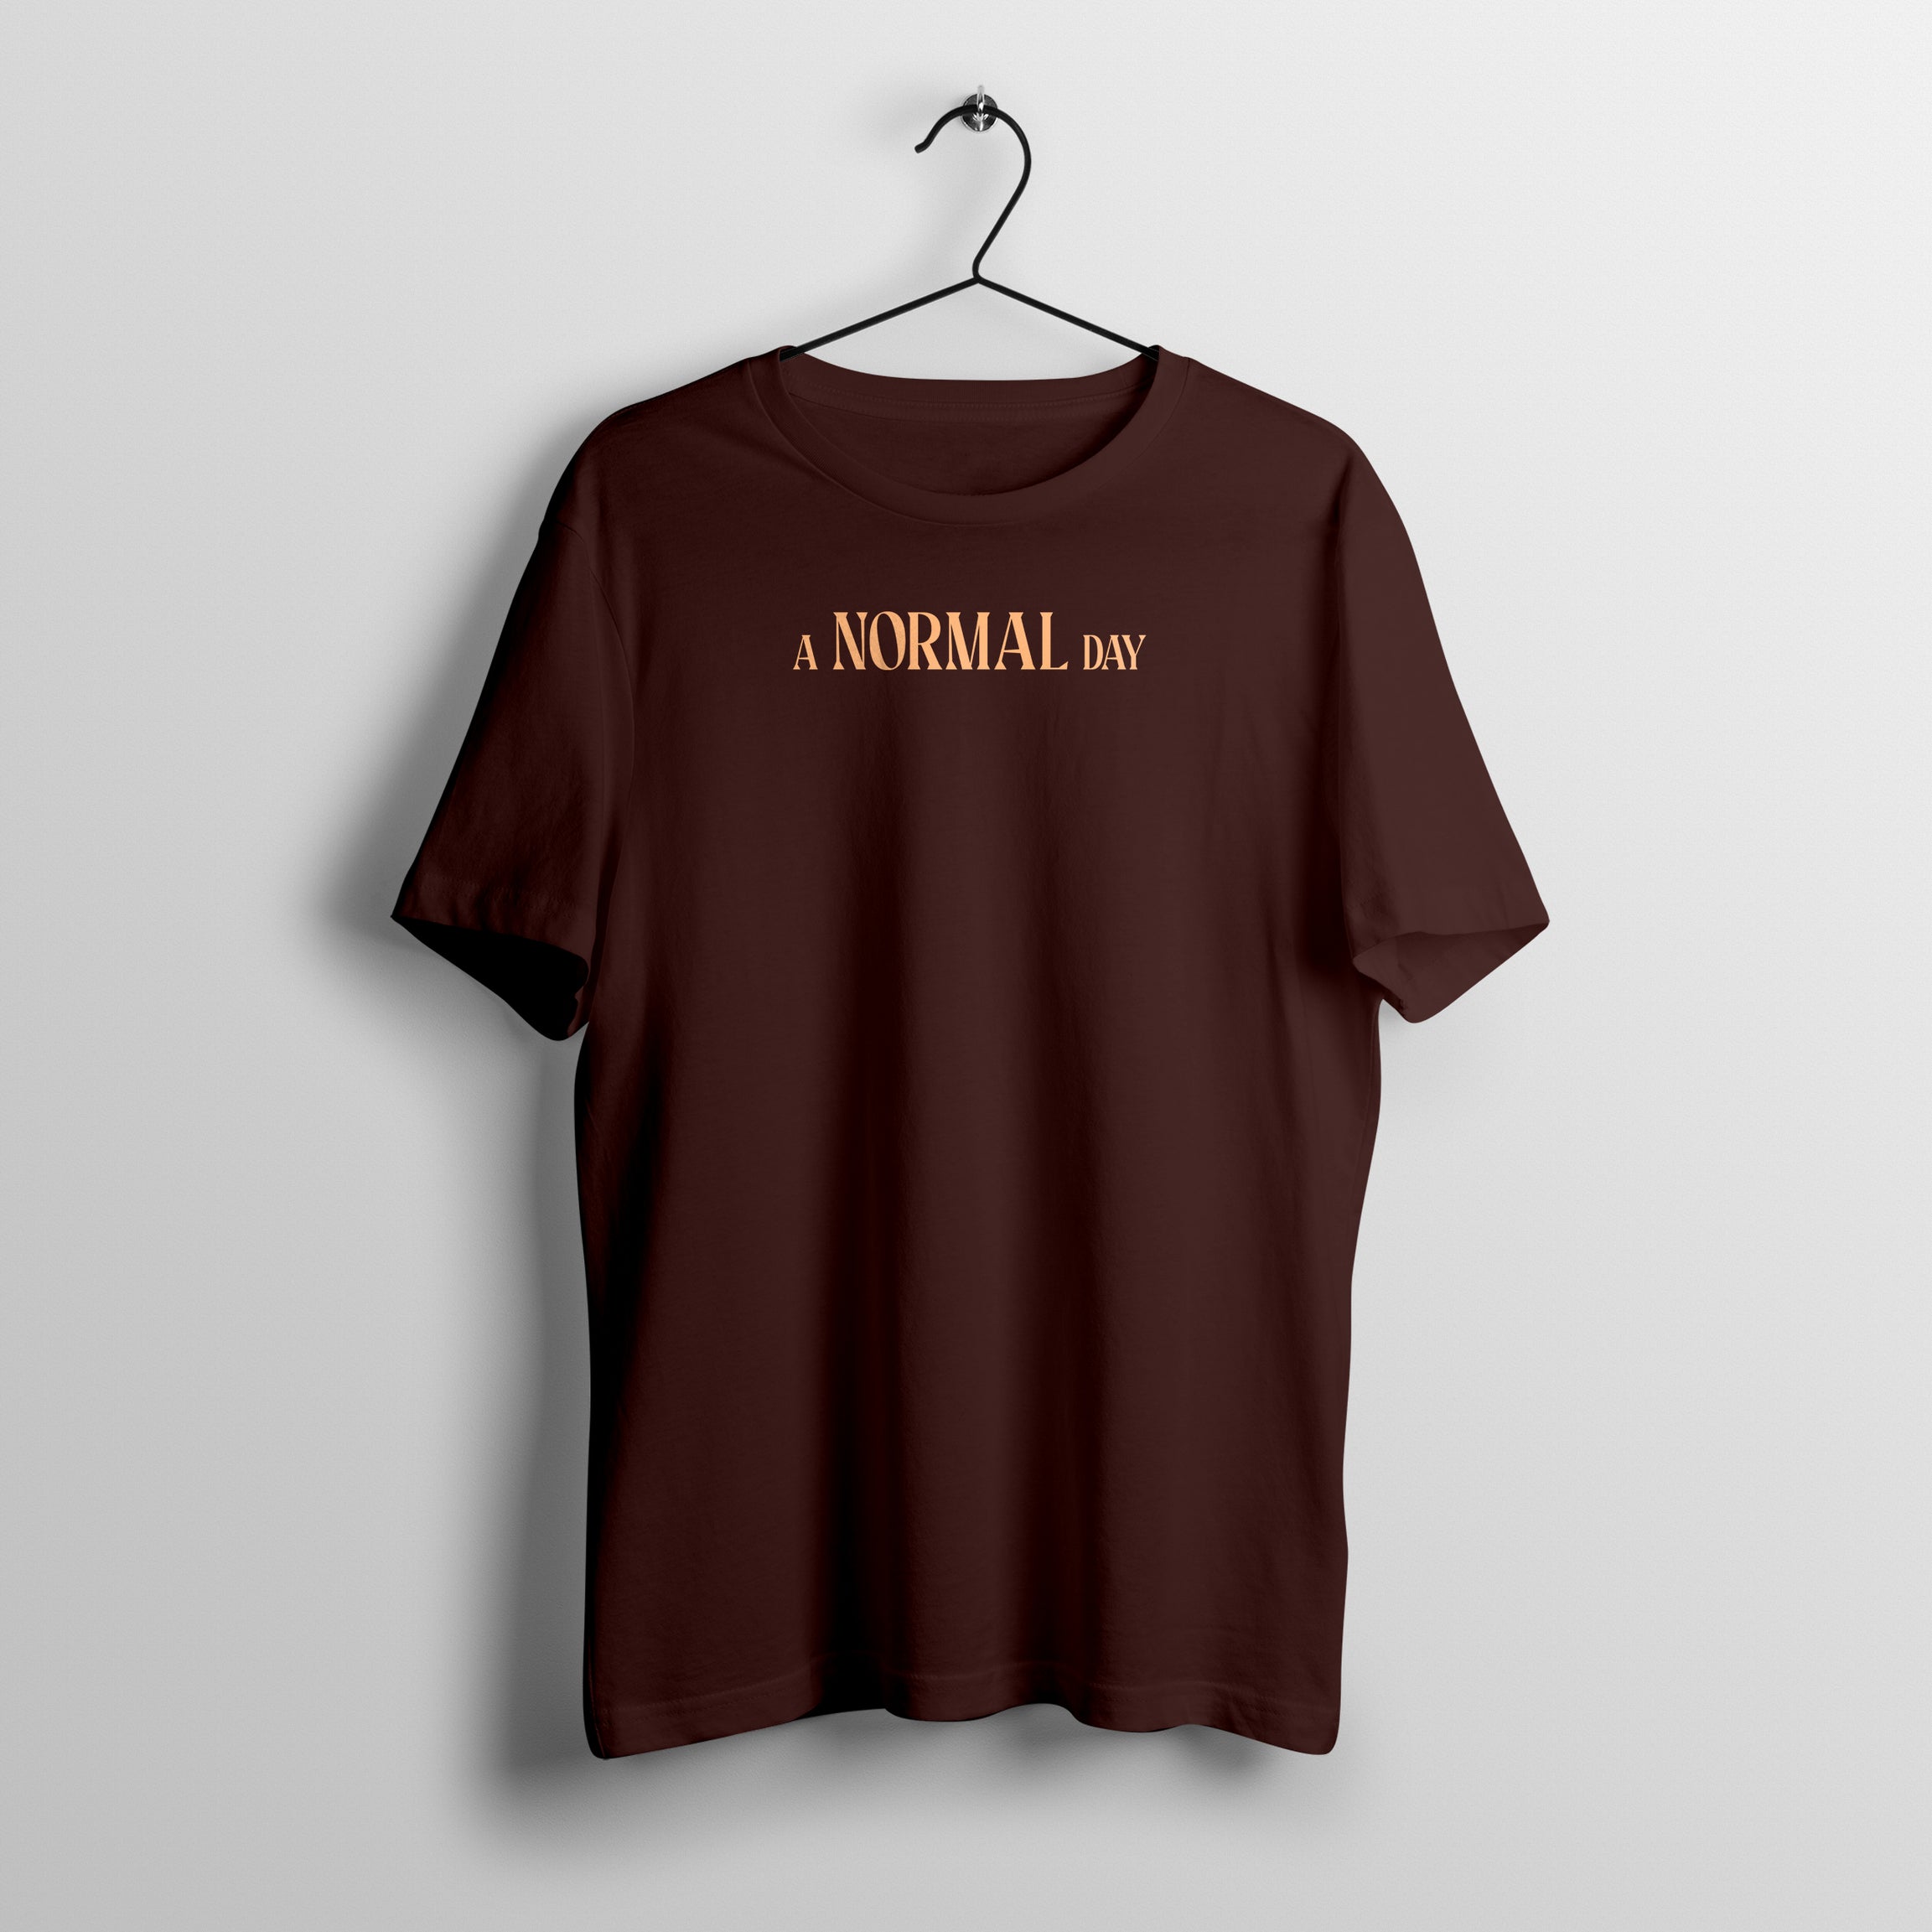 A Normal Day T-Shirt